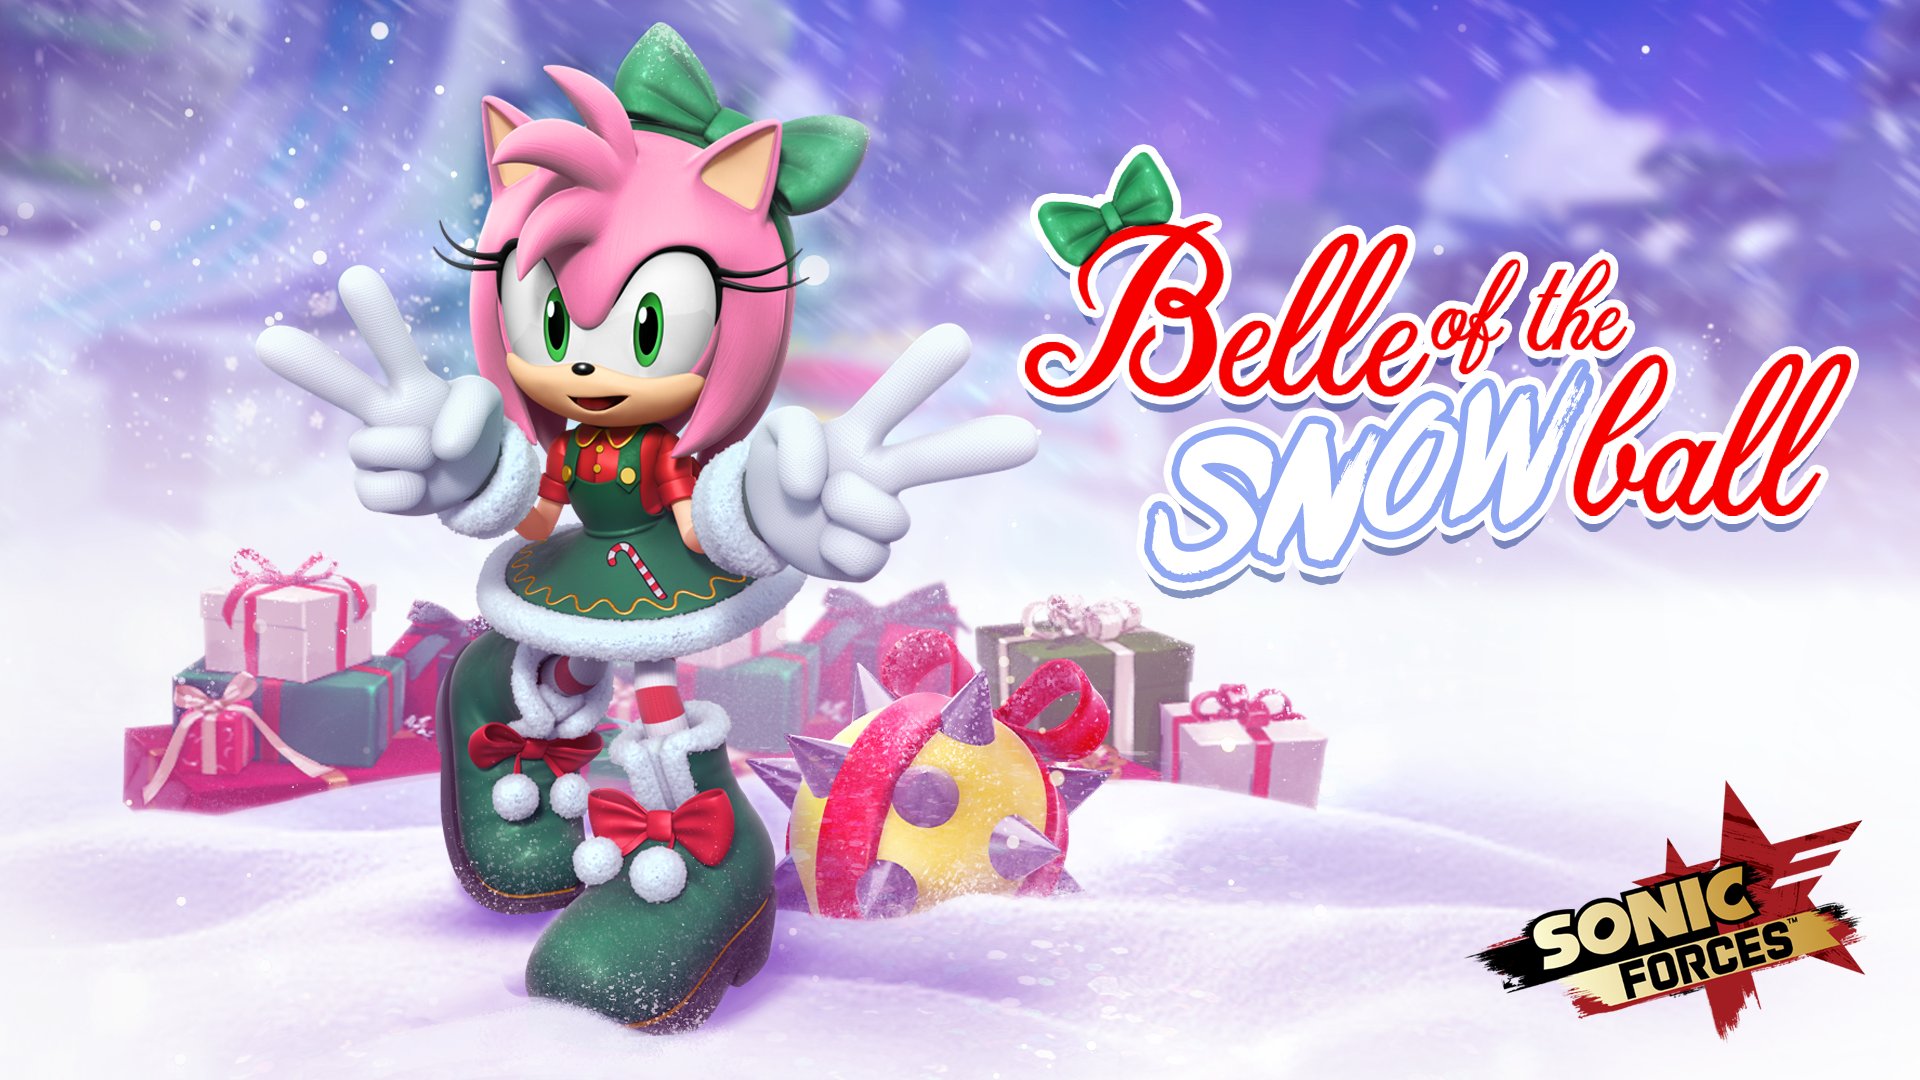 video game, sonic forces: speed battle, amy rose, christmas, snow